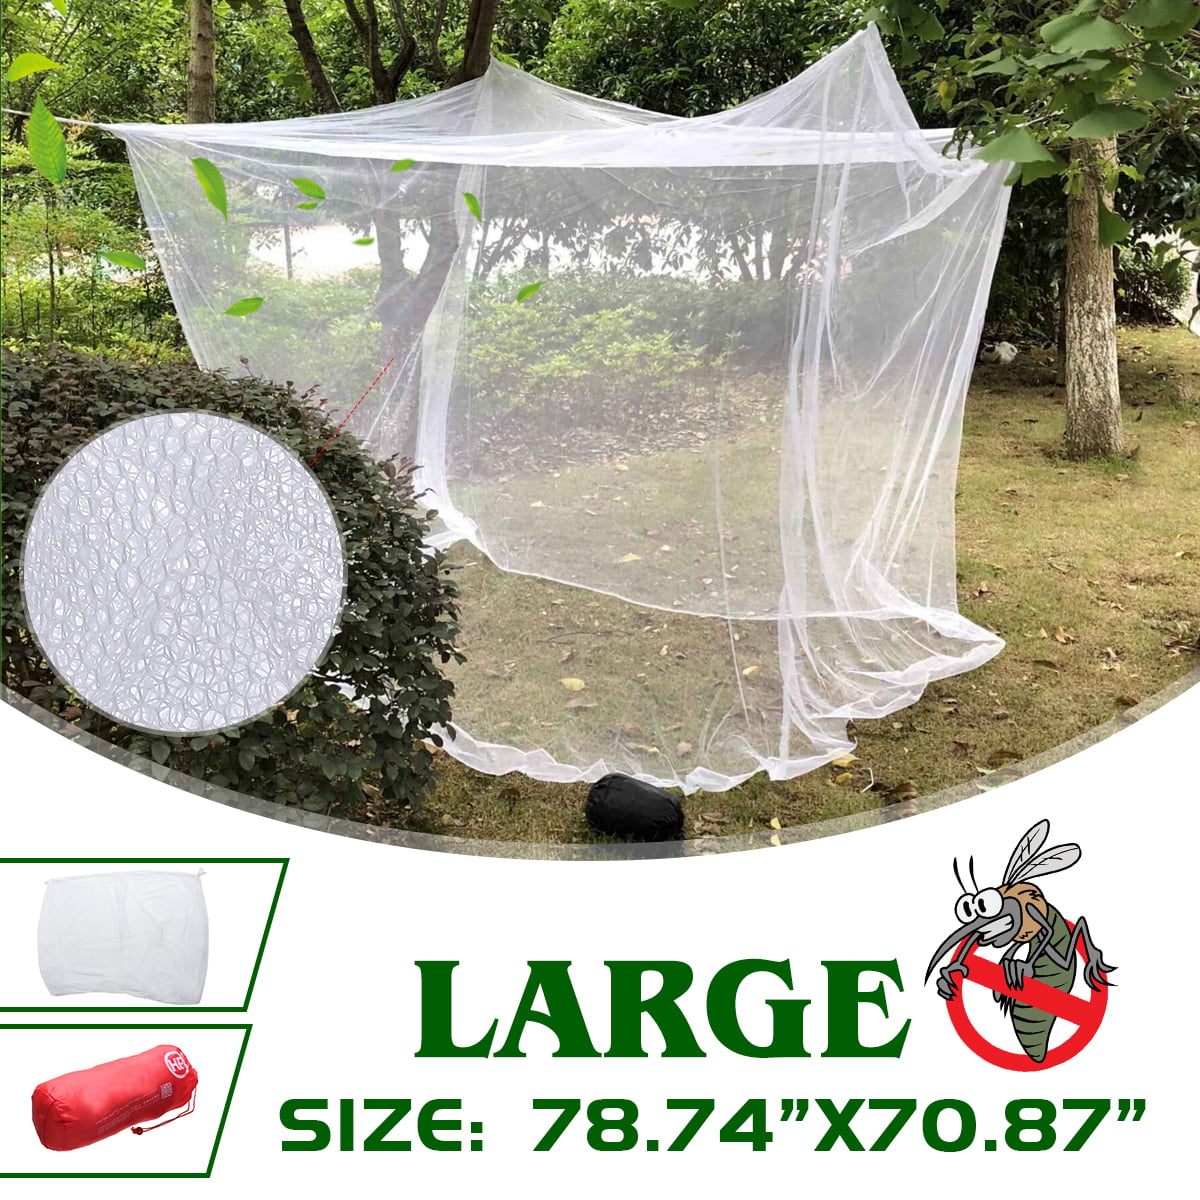 Extra Large Size White Mosquito Fly Net Netting Indoor Outdoor Camp Portable New 